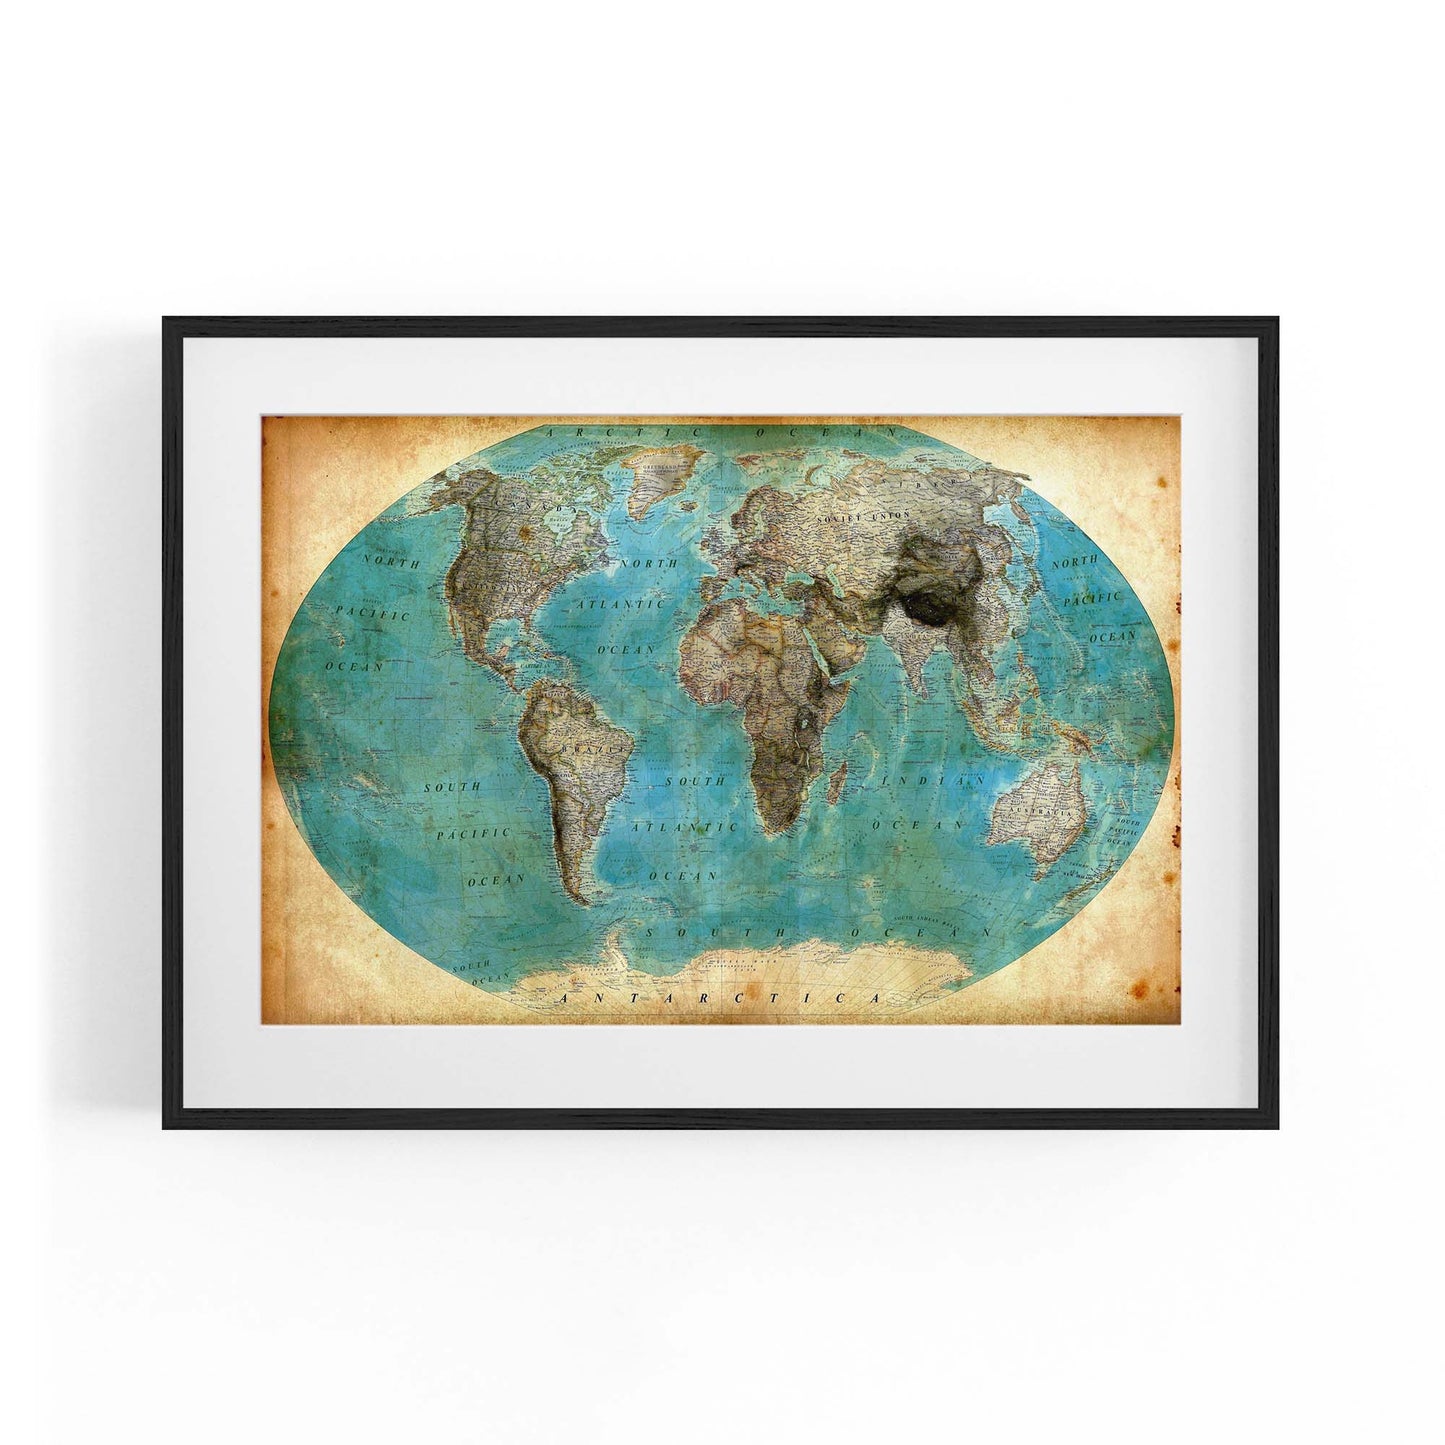 Vintage World Map Old Wall Art #5 - The Affordable Art Company